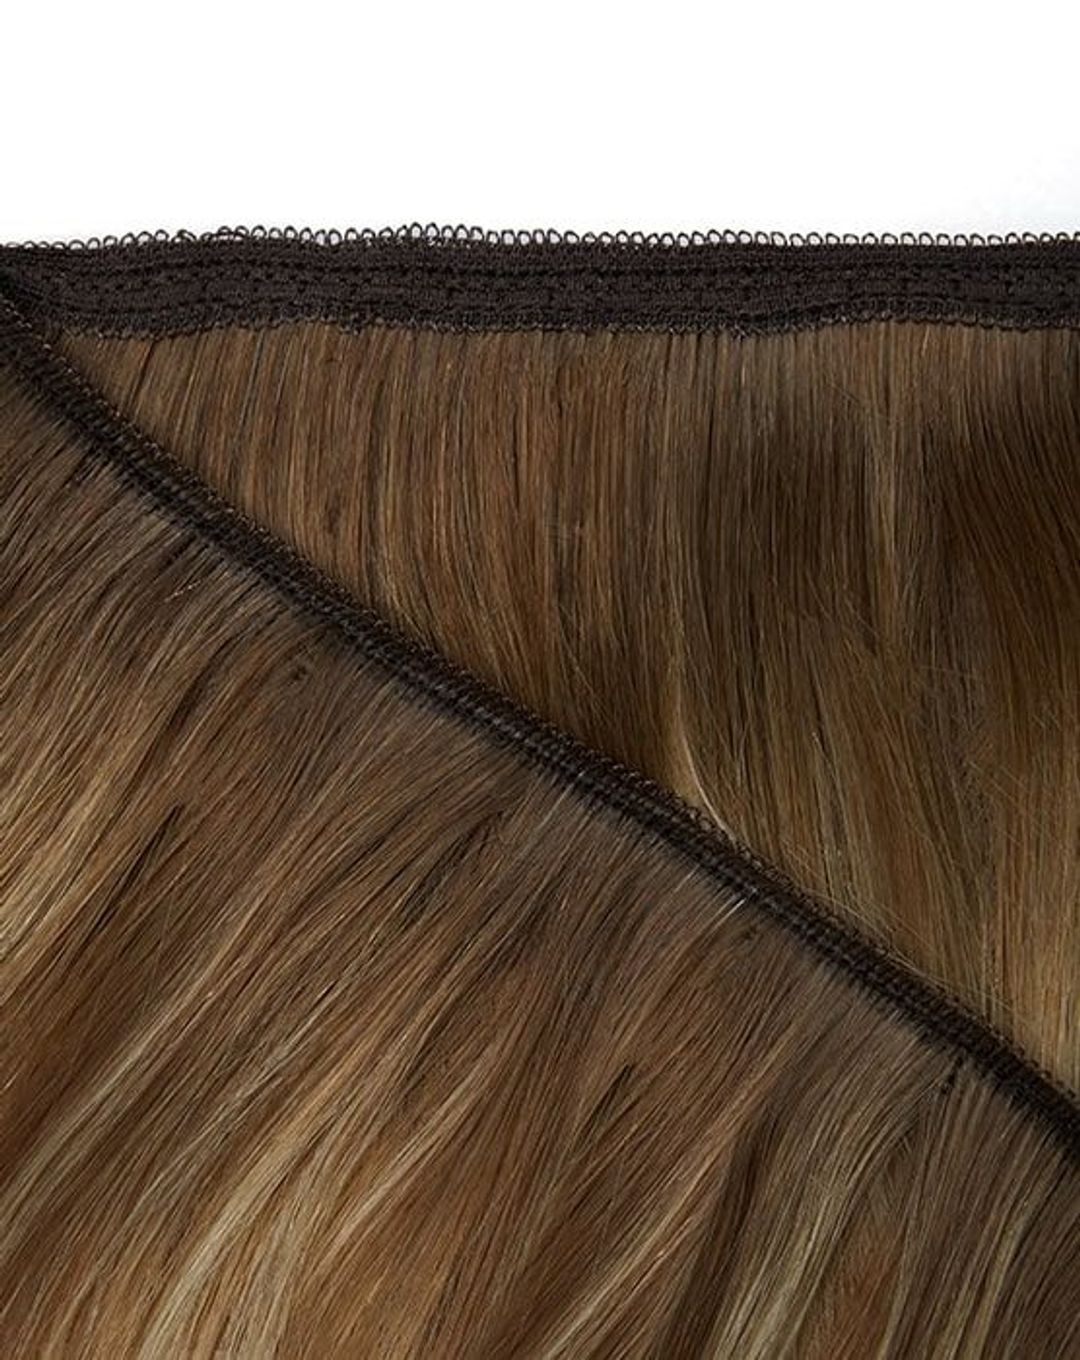 Beauty Works Gold Double Weft Hair Extensions - Mocha Melt,20"